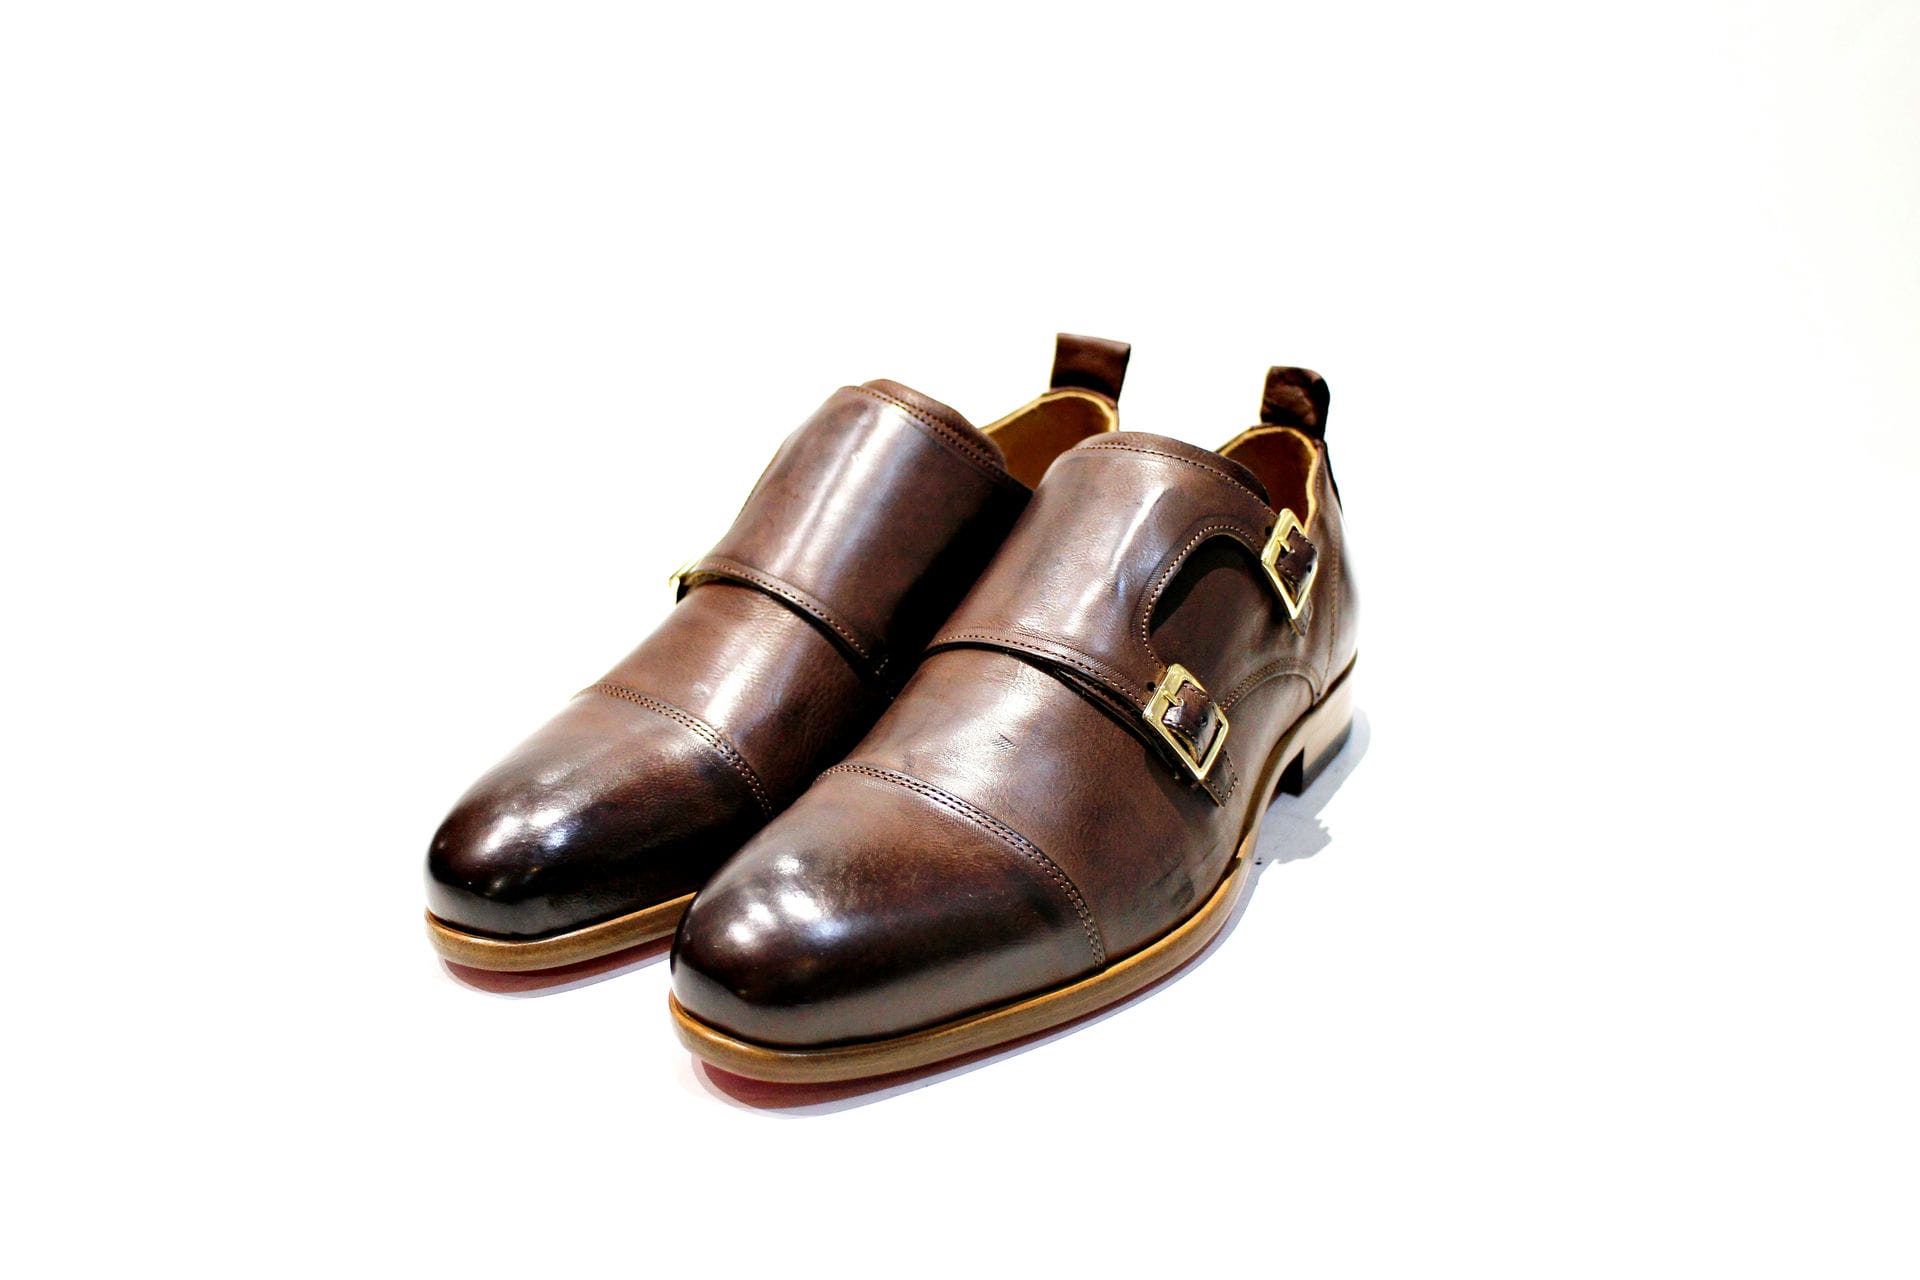 Shoe consisting of leather, leather lining, metal buckles, with leather sole. Handmade in Portugal “Walk with Pintta